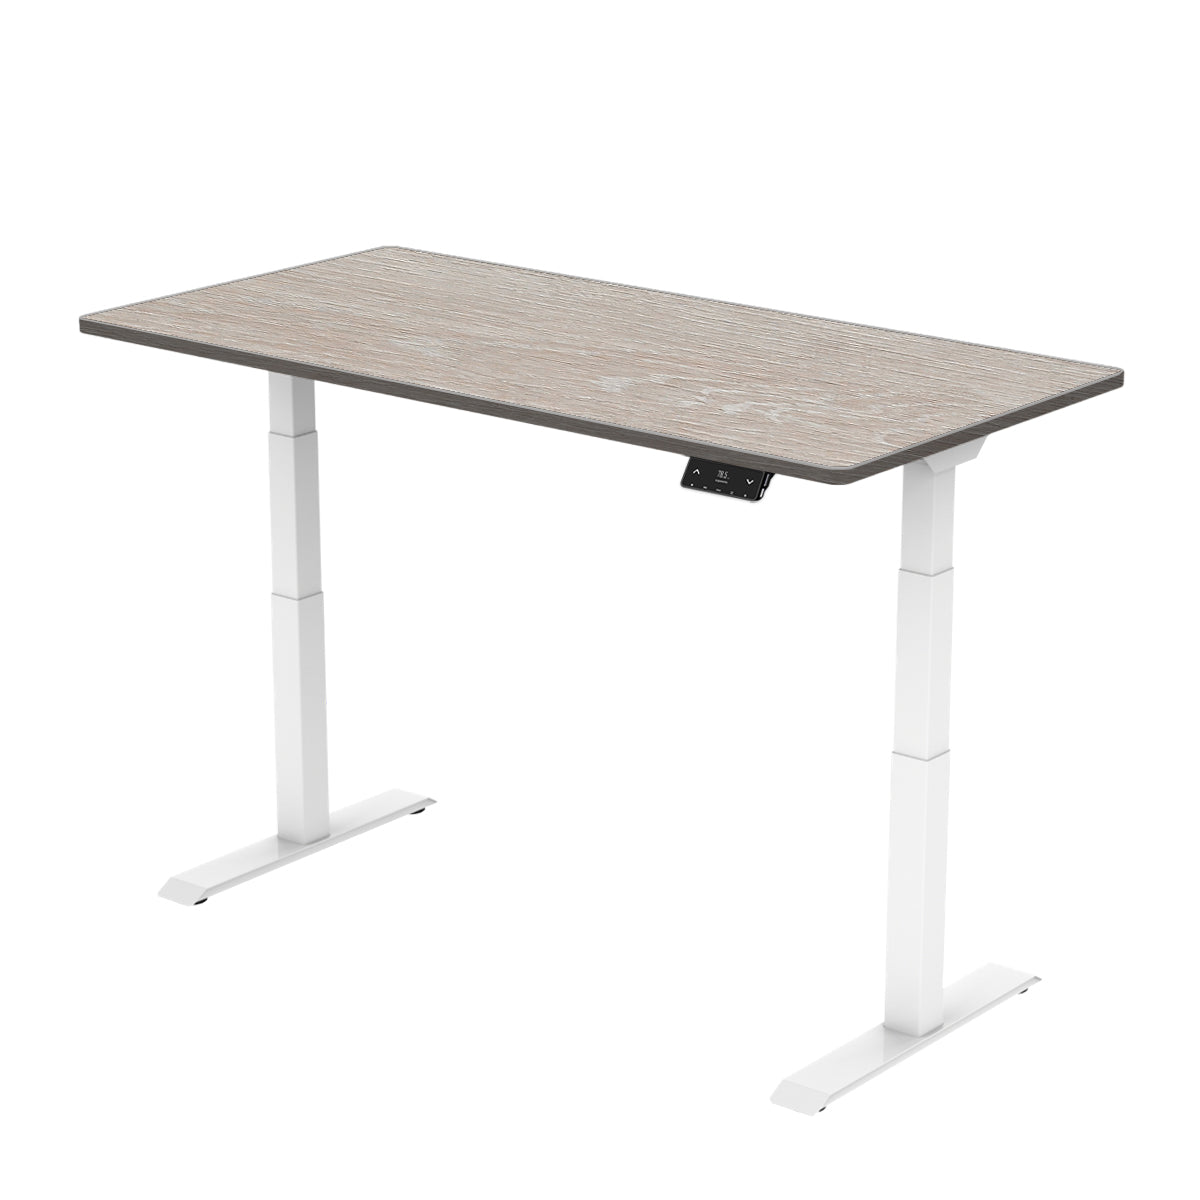 (READY STOCKS) Ergoworks Signature Standing Desk, Formica Laminate 0.8mm Tabletop